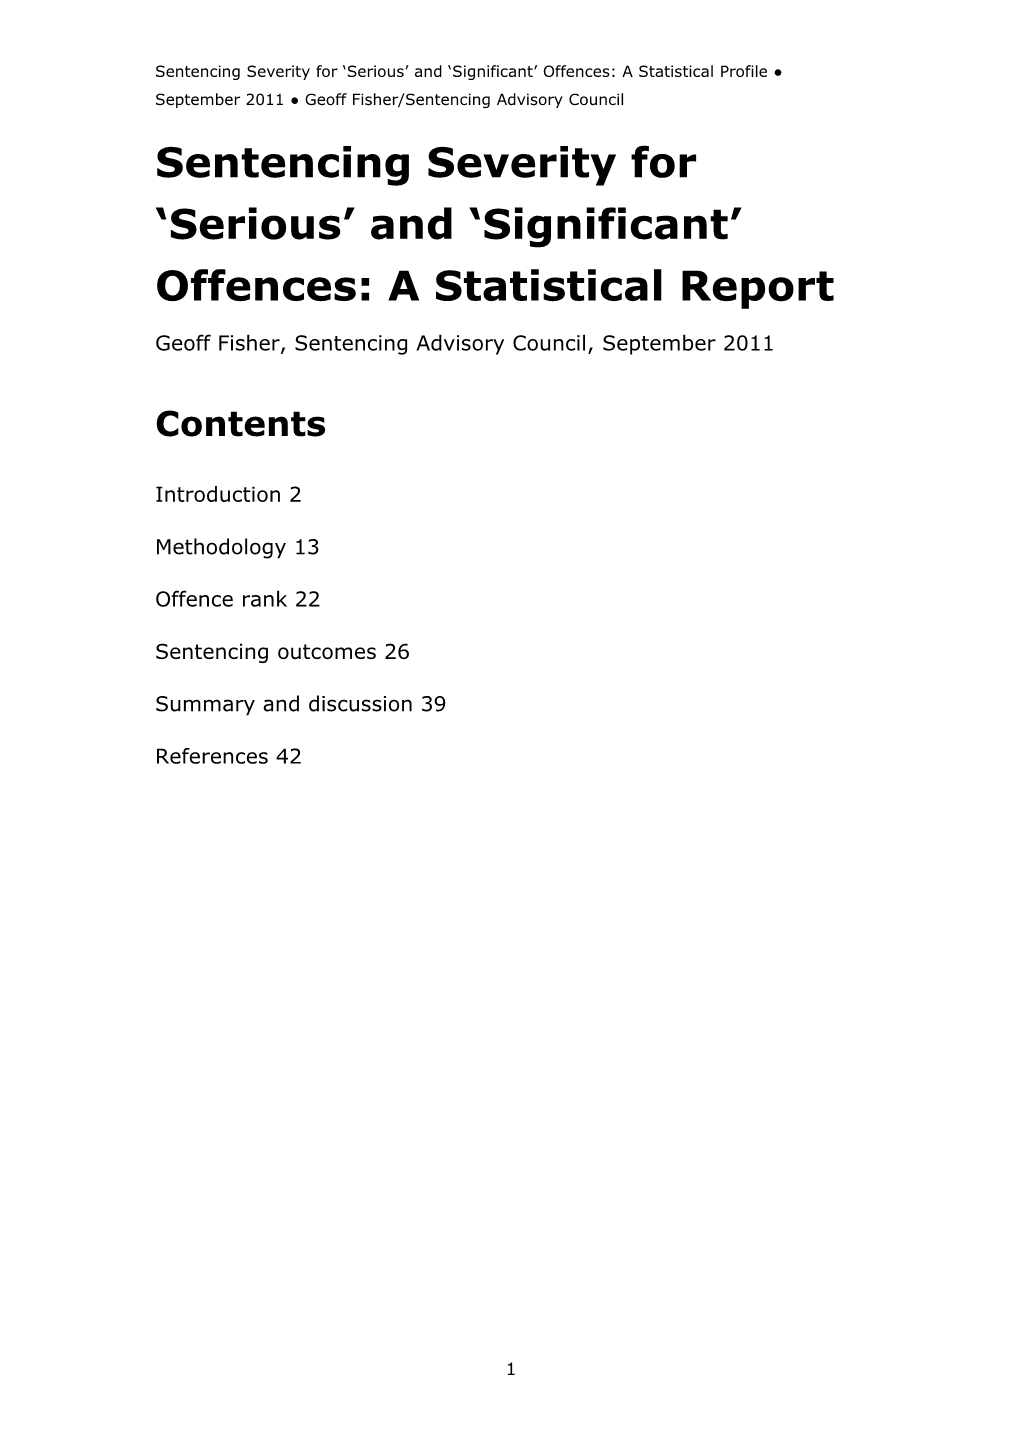 Sentencing Severity for Serious and Significant Offences: a Statistical Report